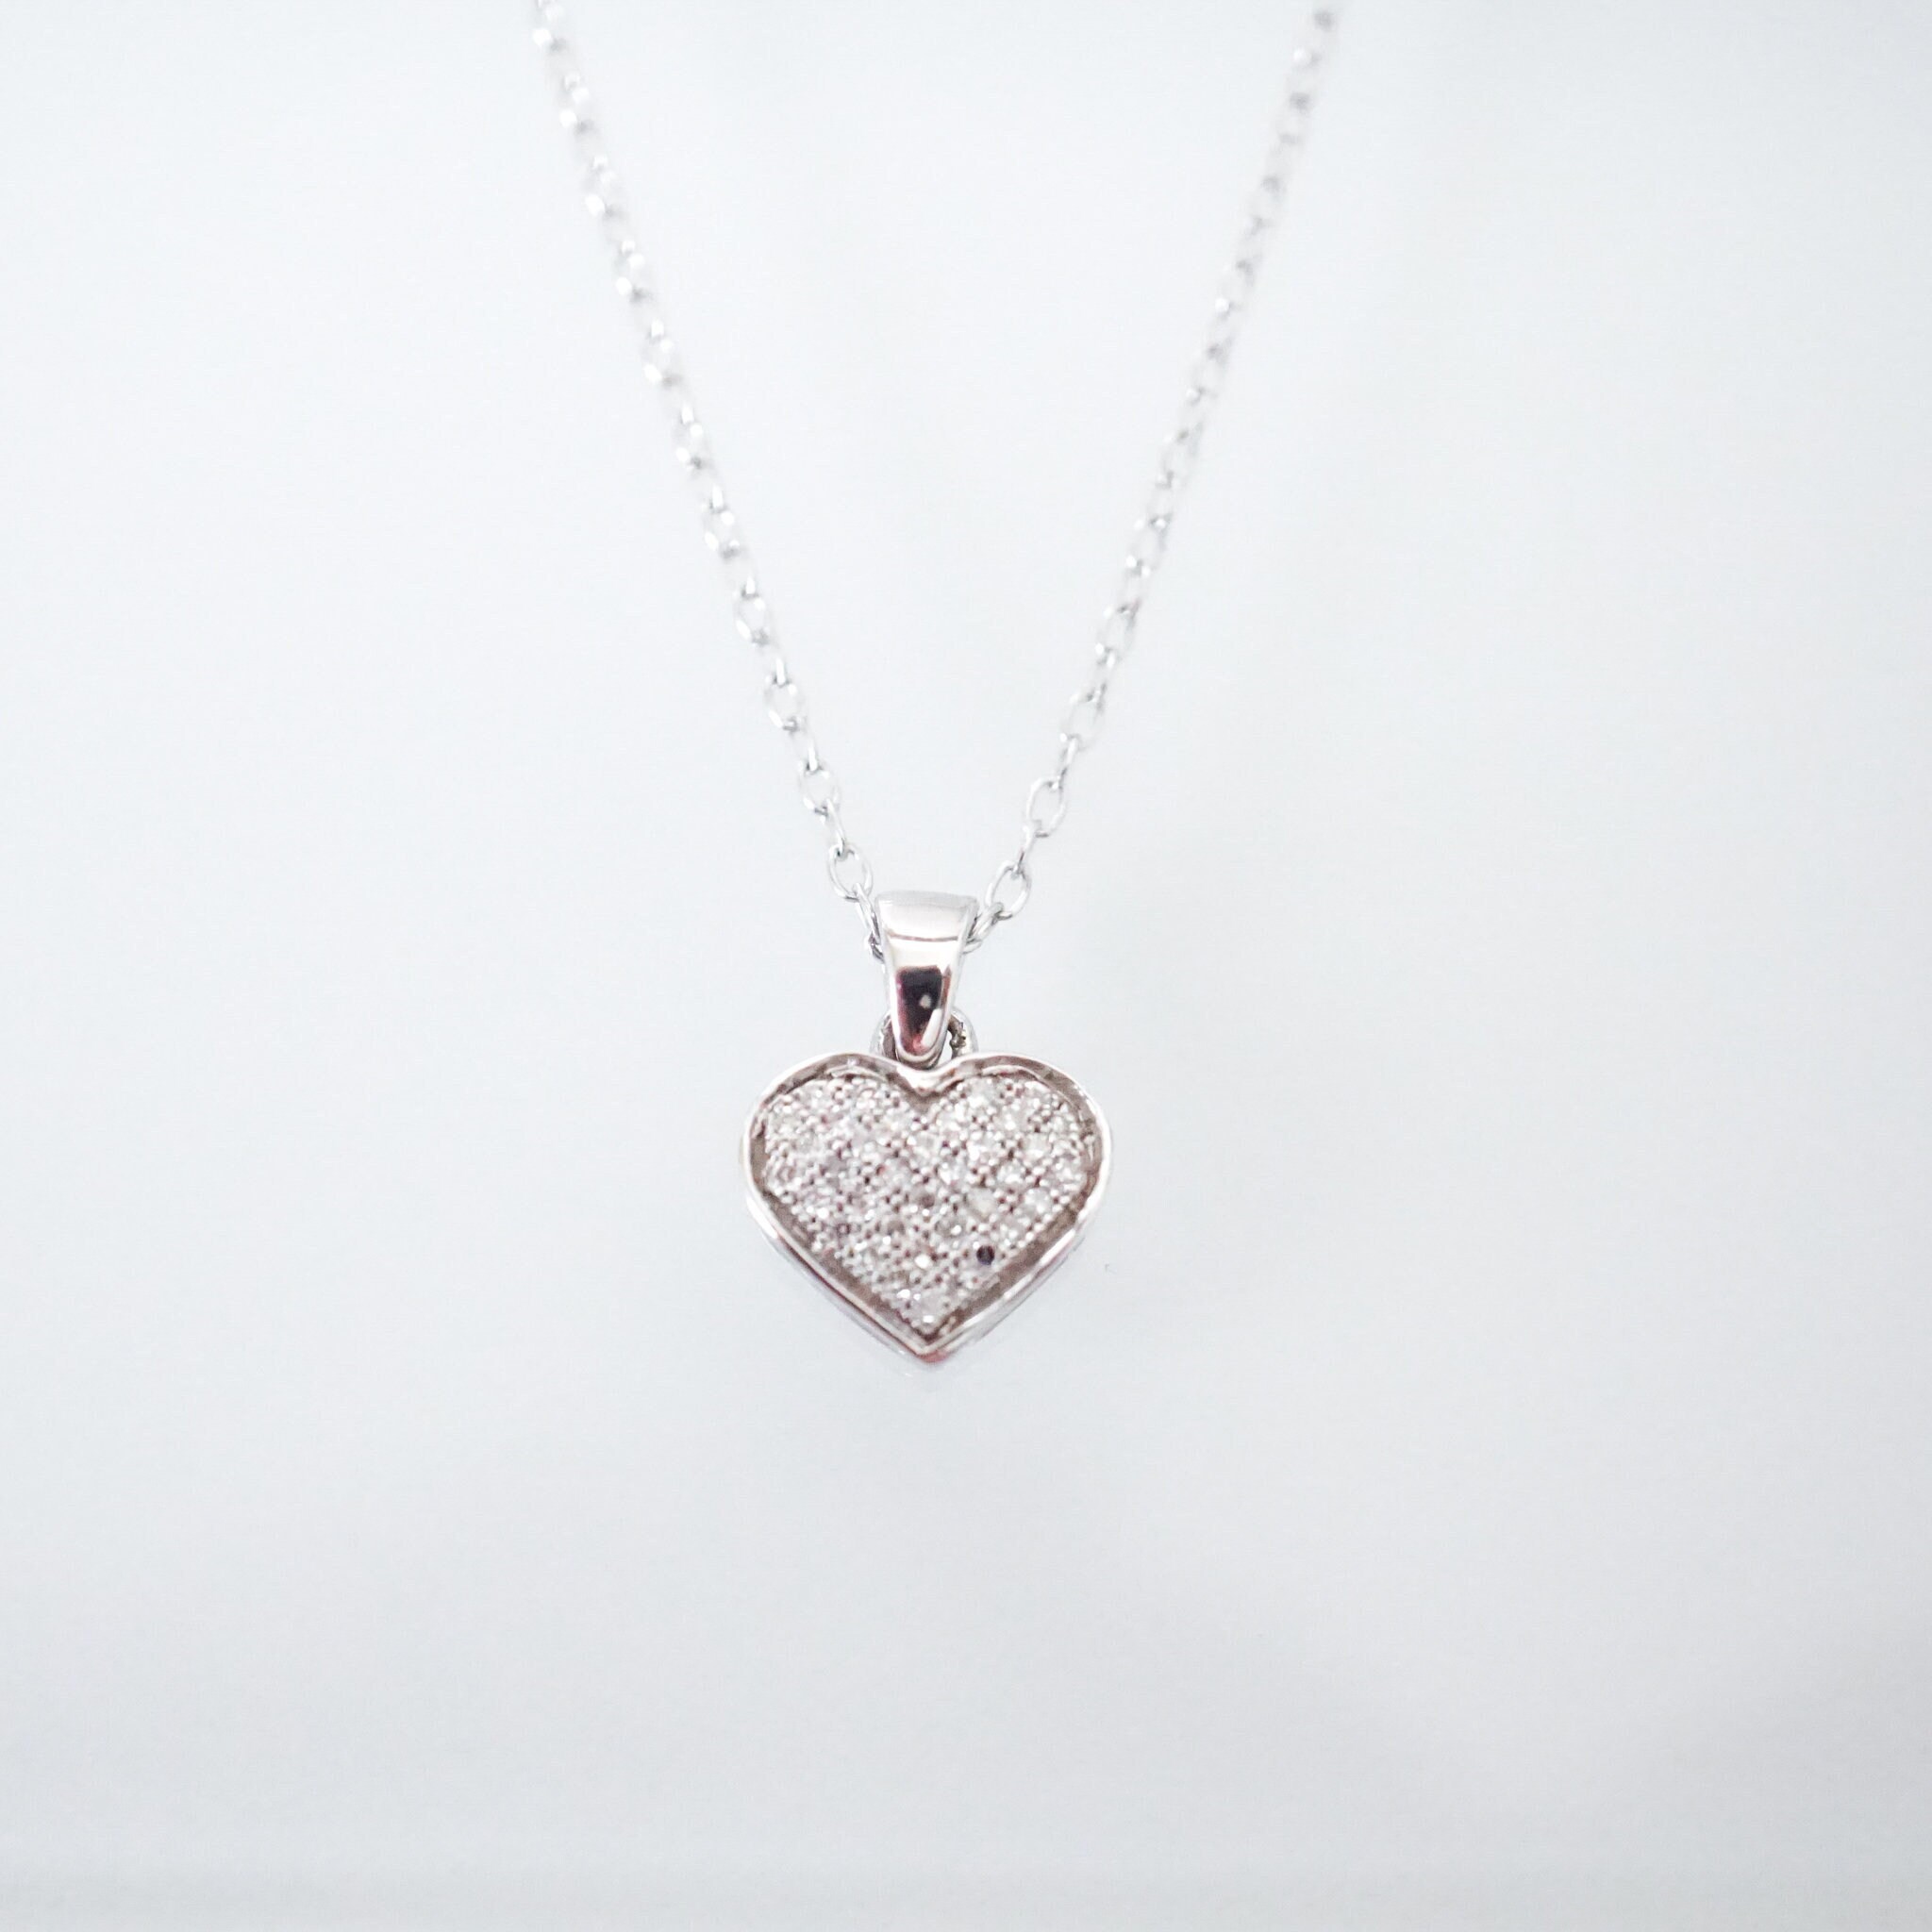 10kt Yellow Gold Diamond Micro-Pave Heart Pendant with Chain